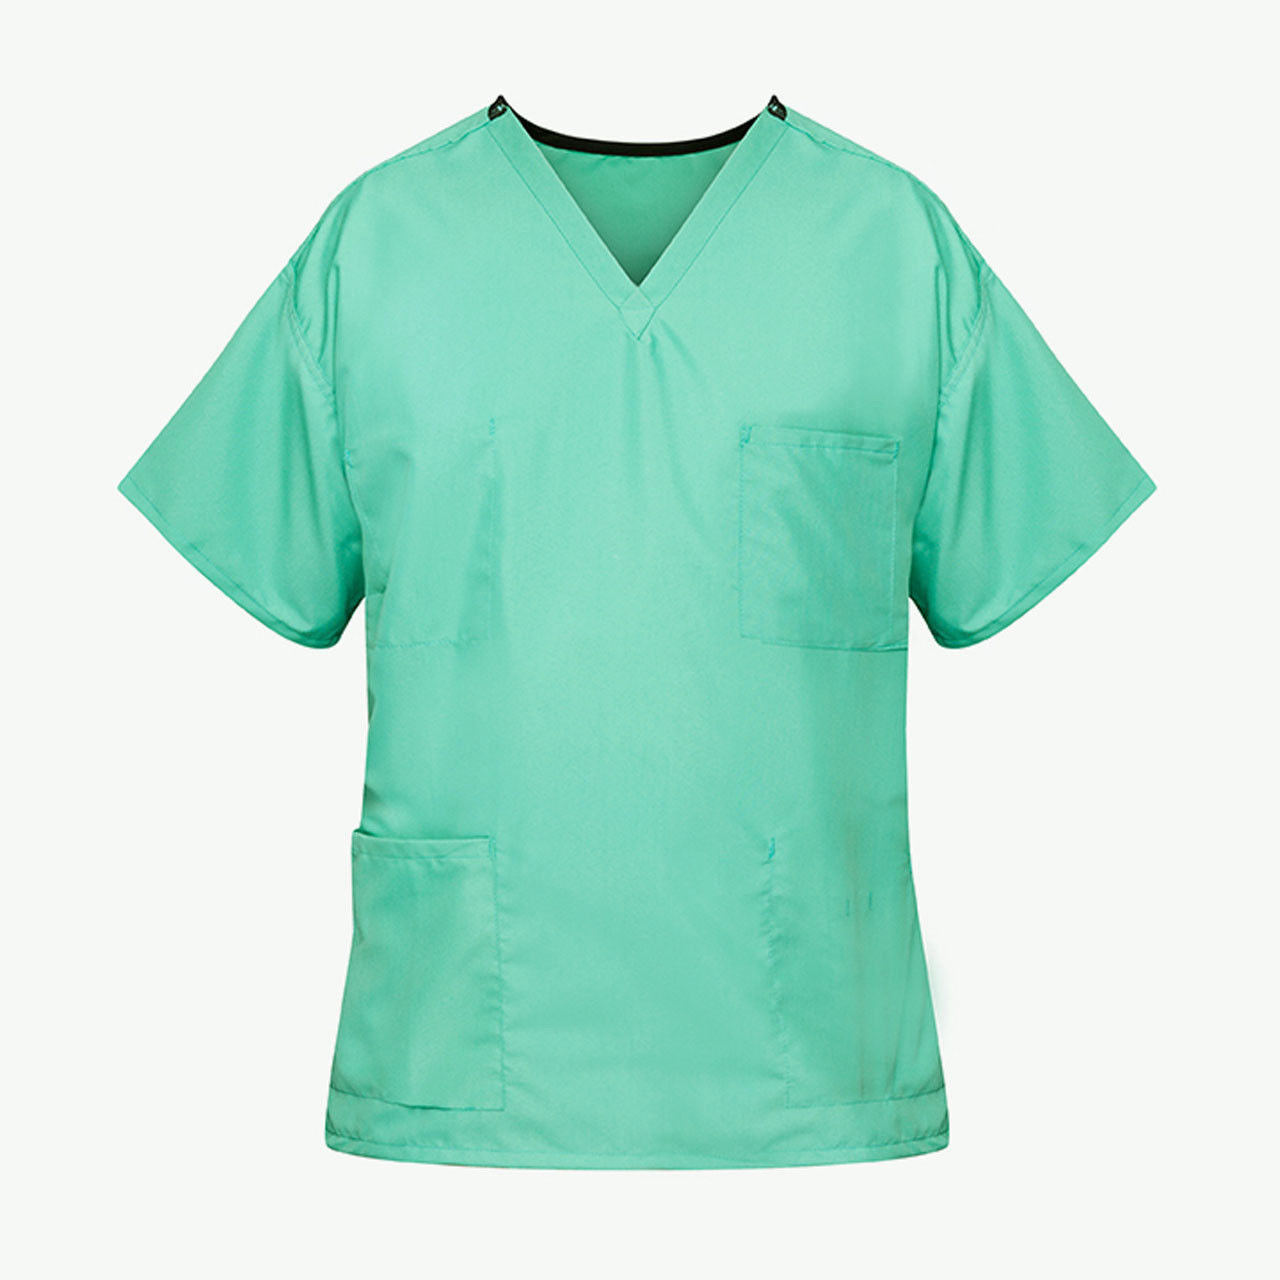 What fabric is used for these jade green scrubs?